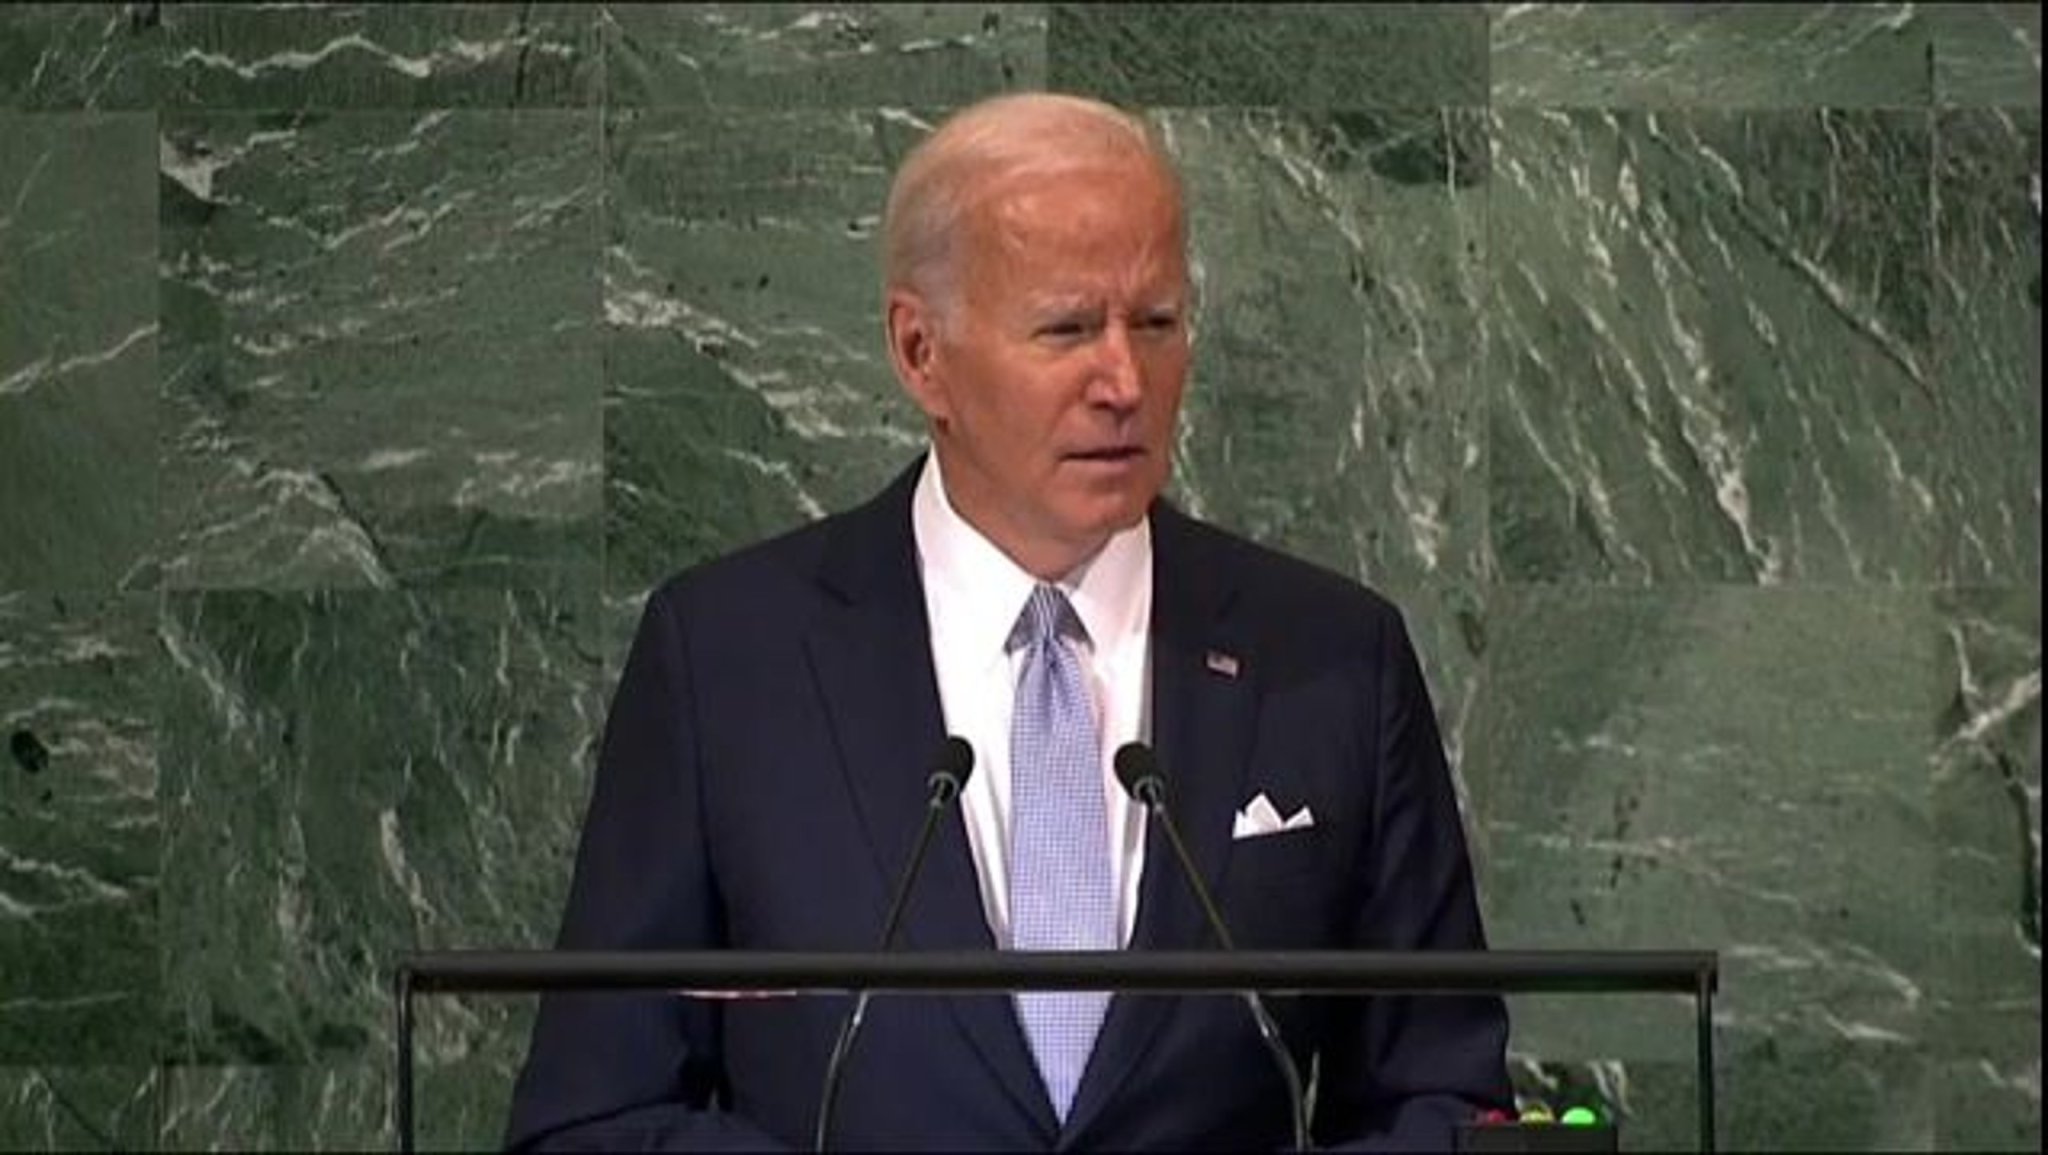 President Biden at the UN says no matter who you are, Russia’s war in Ukraine “should make your blood run cold.”